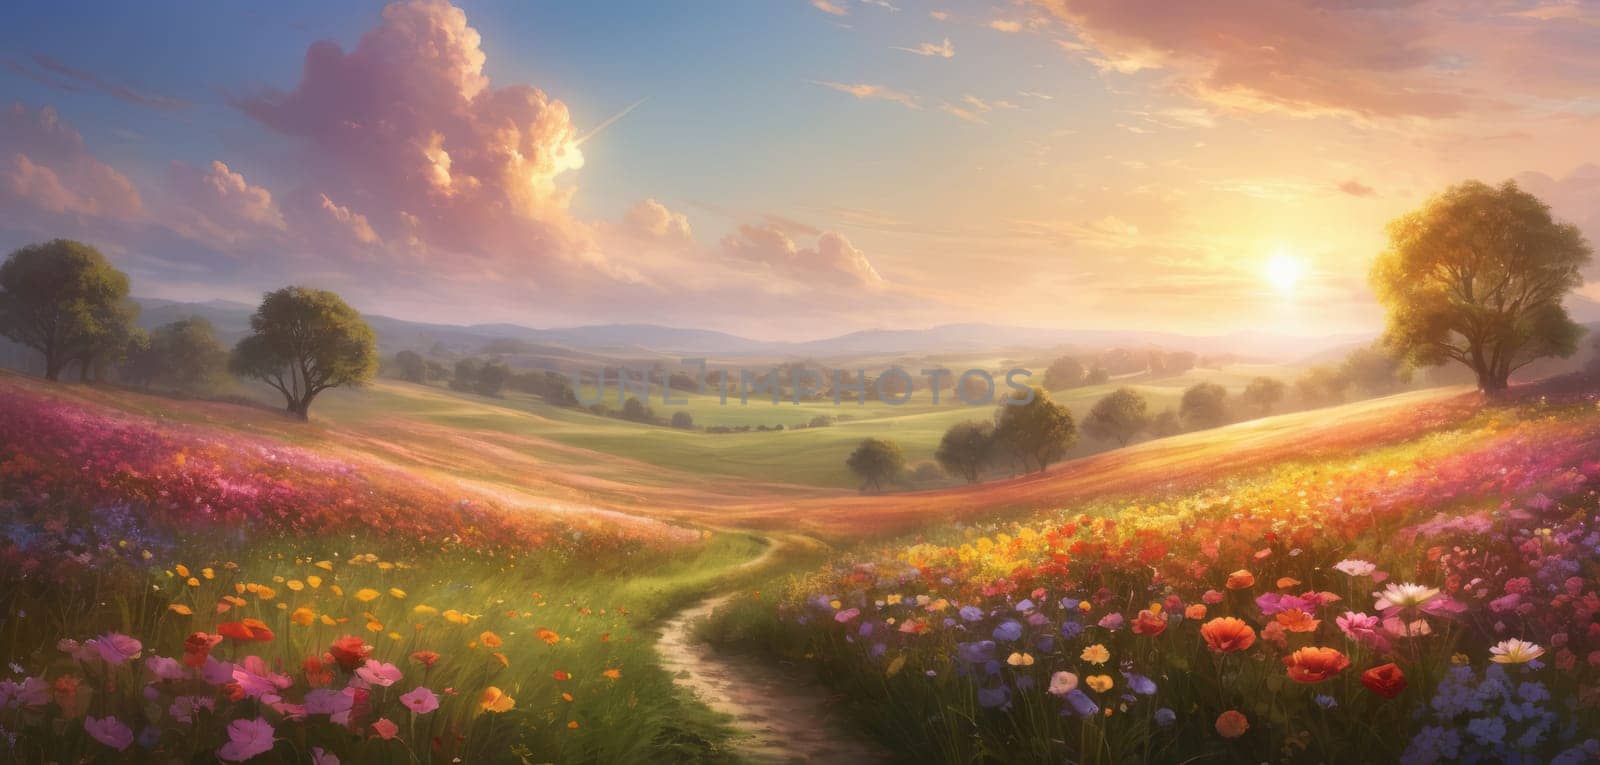 Sunrise over a blooming colorful meadow by Andre1ns